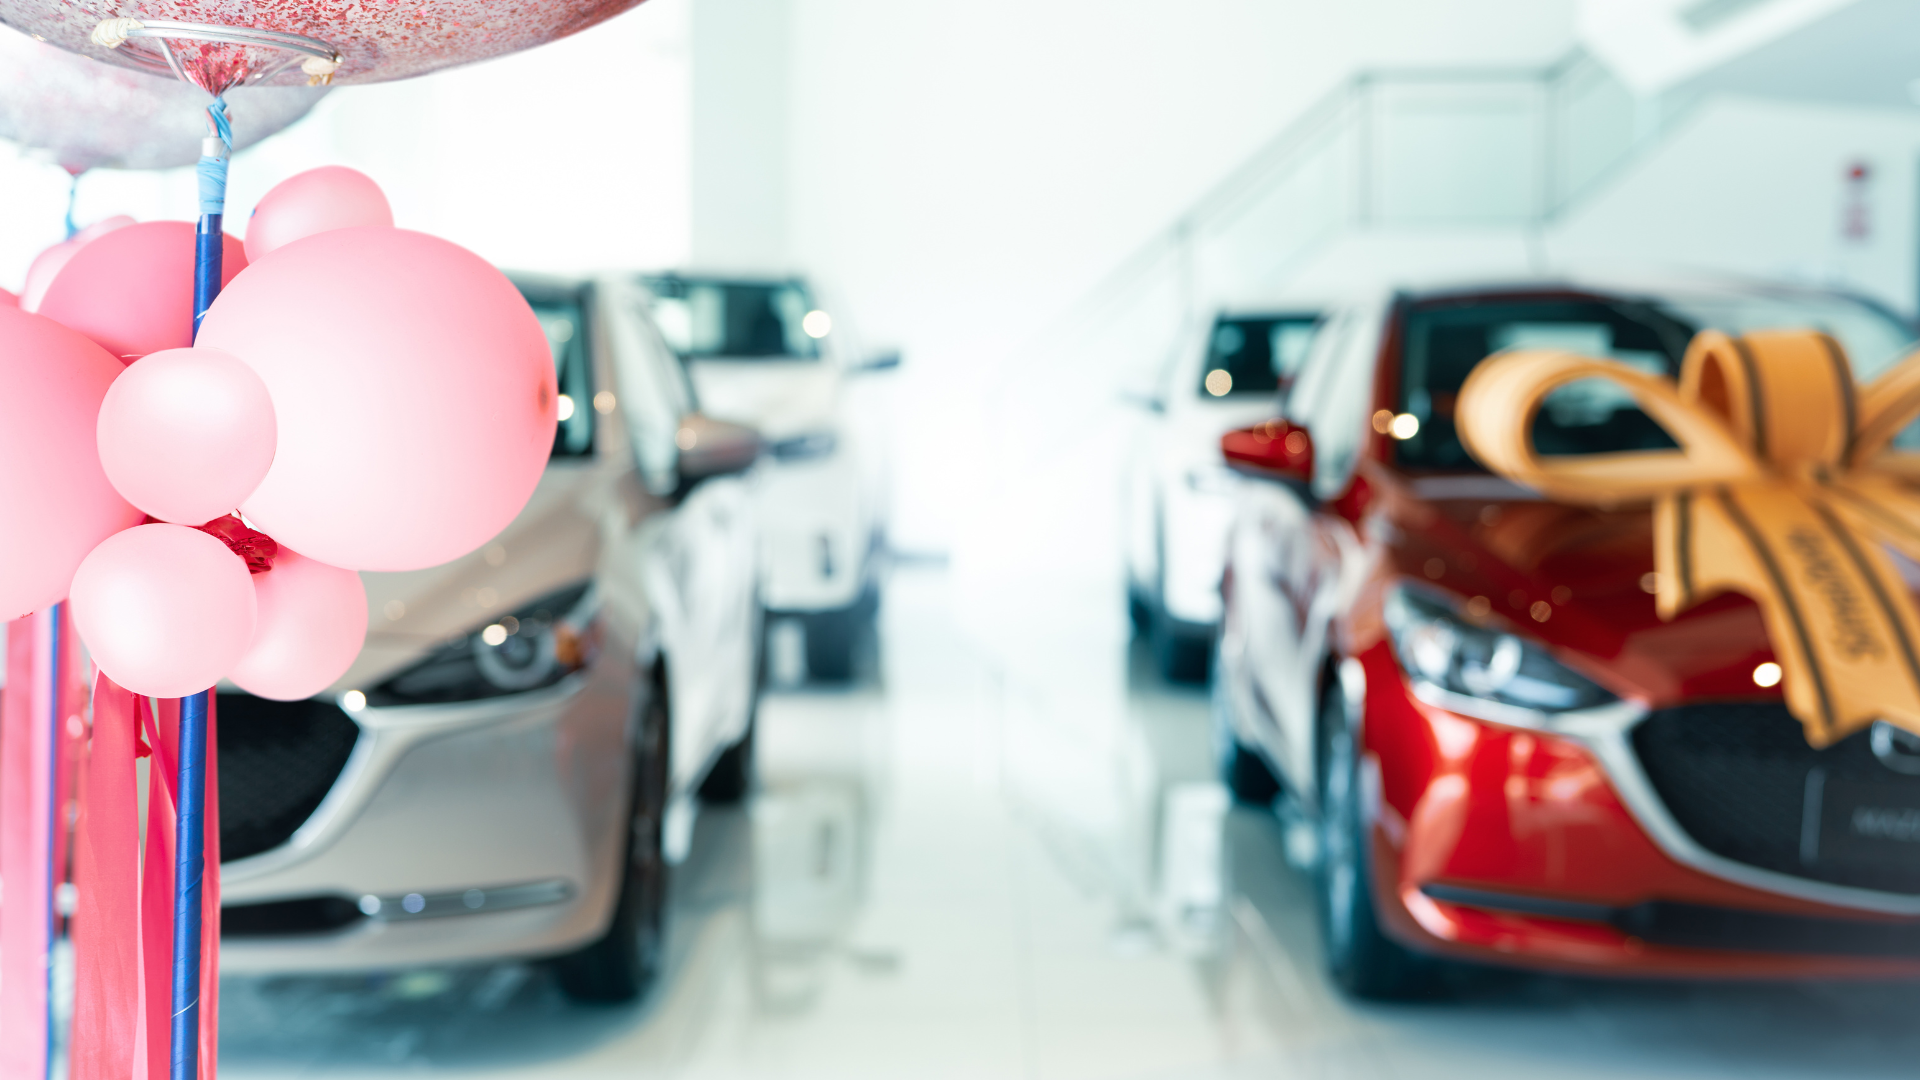 A row of cars are lined up in a showroom with balloons and bows.